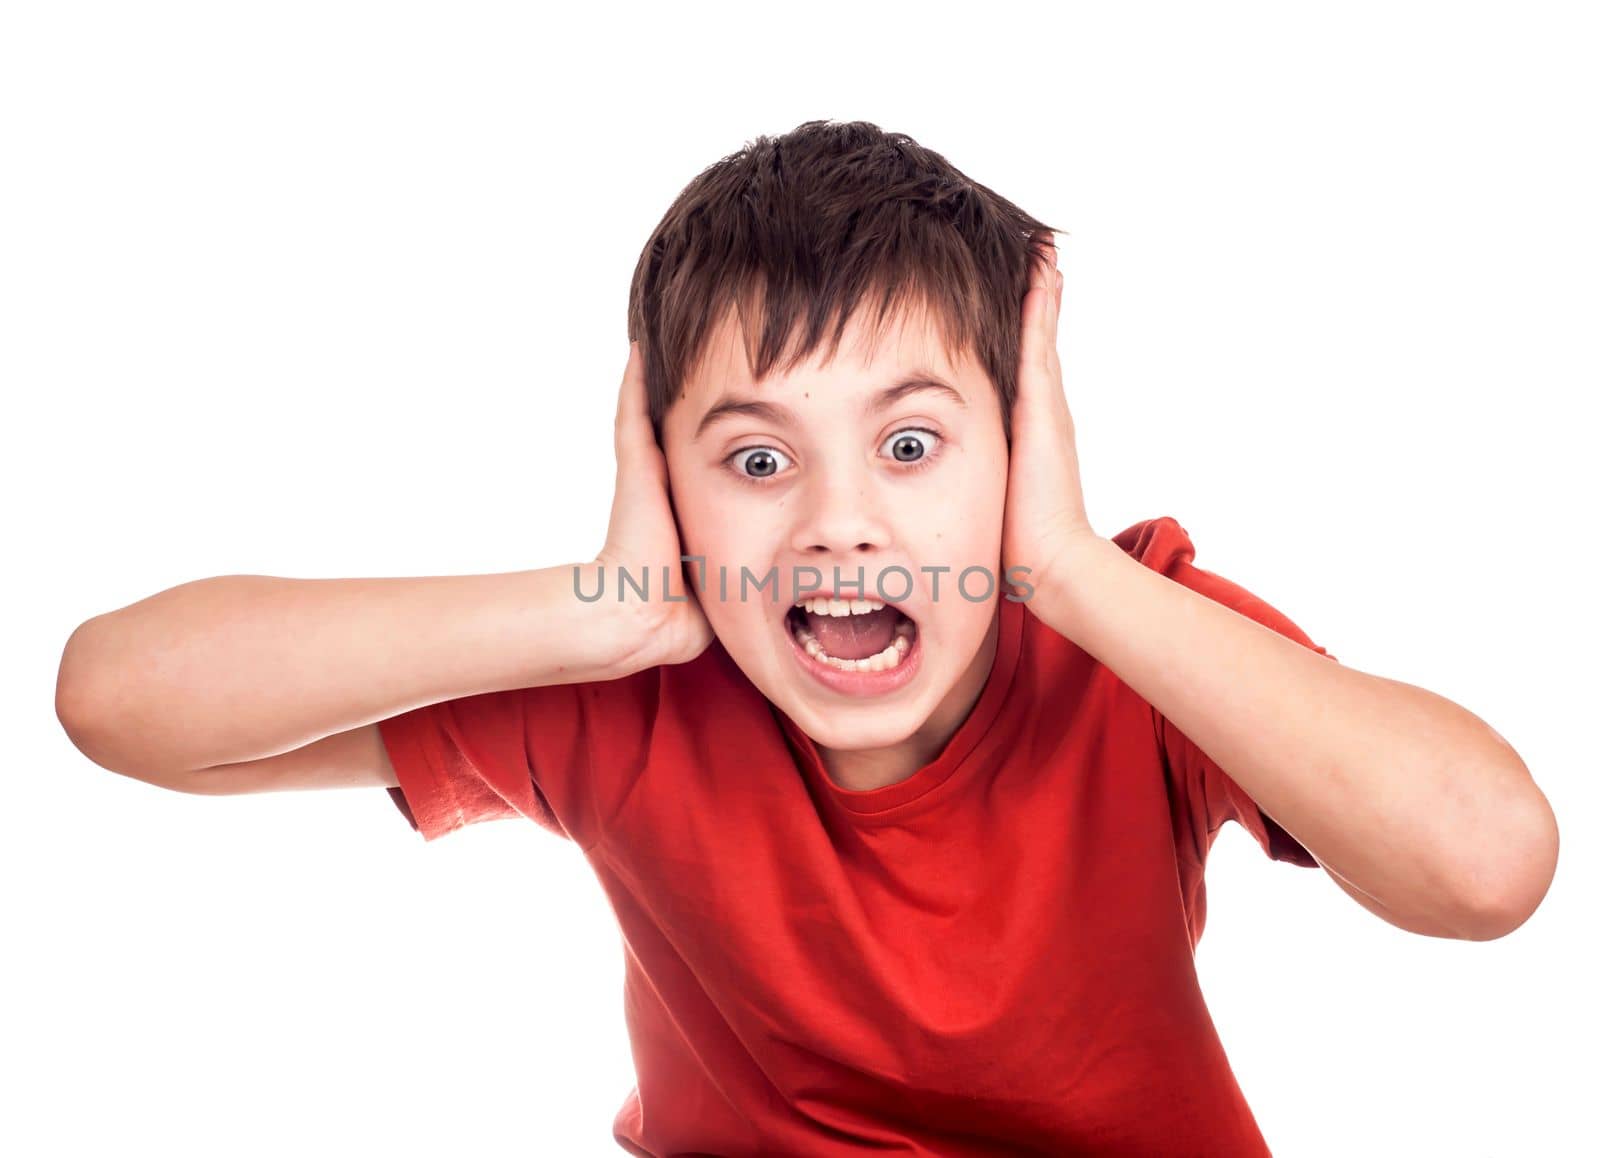 boy indignant, shouts, surprised separately on white background by aprilphoto